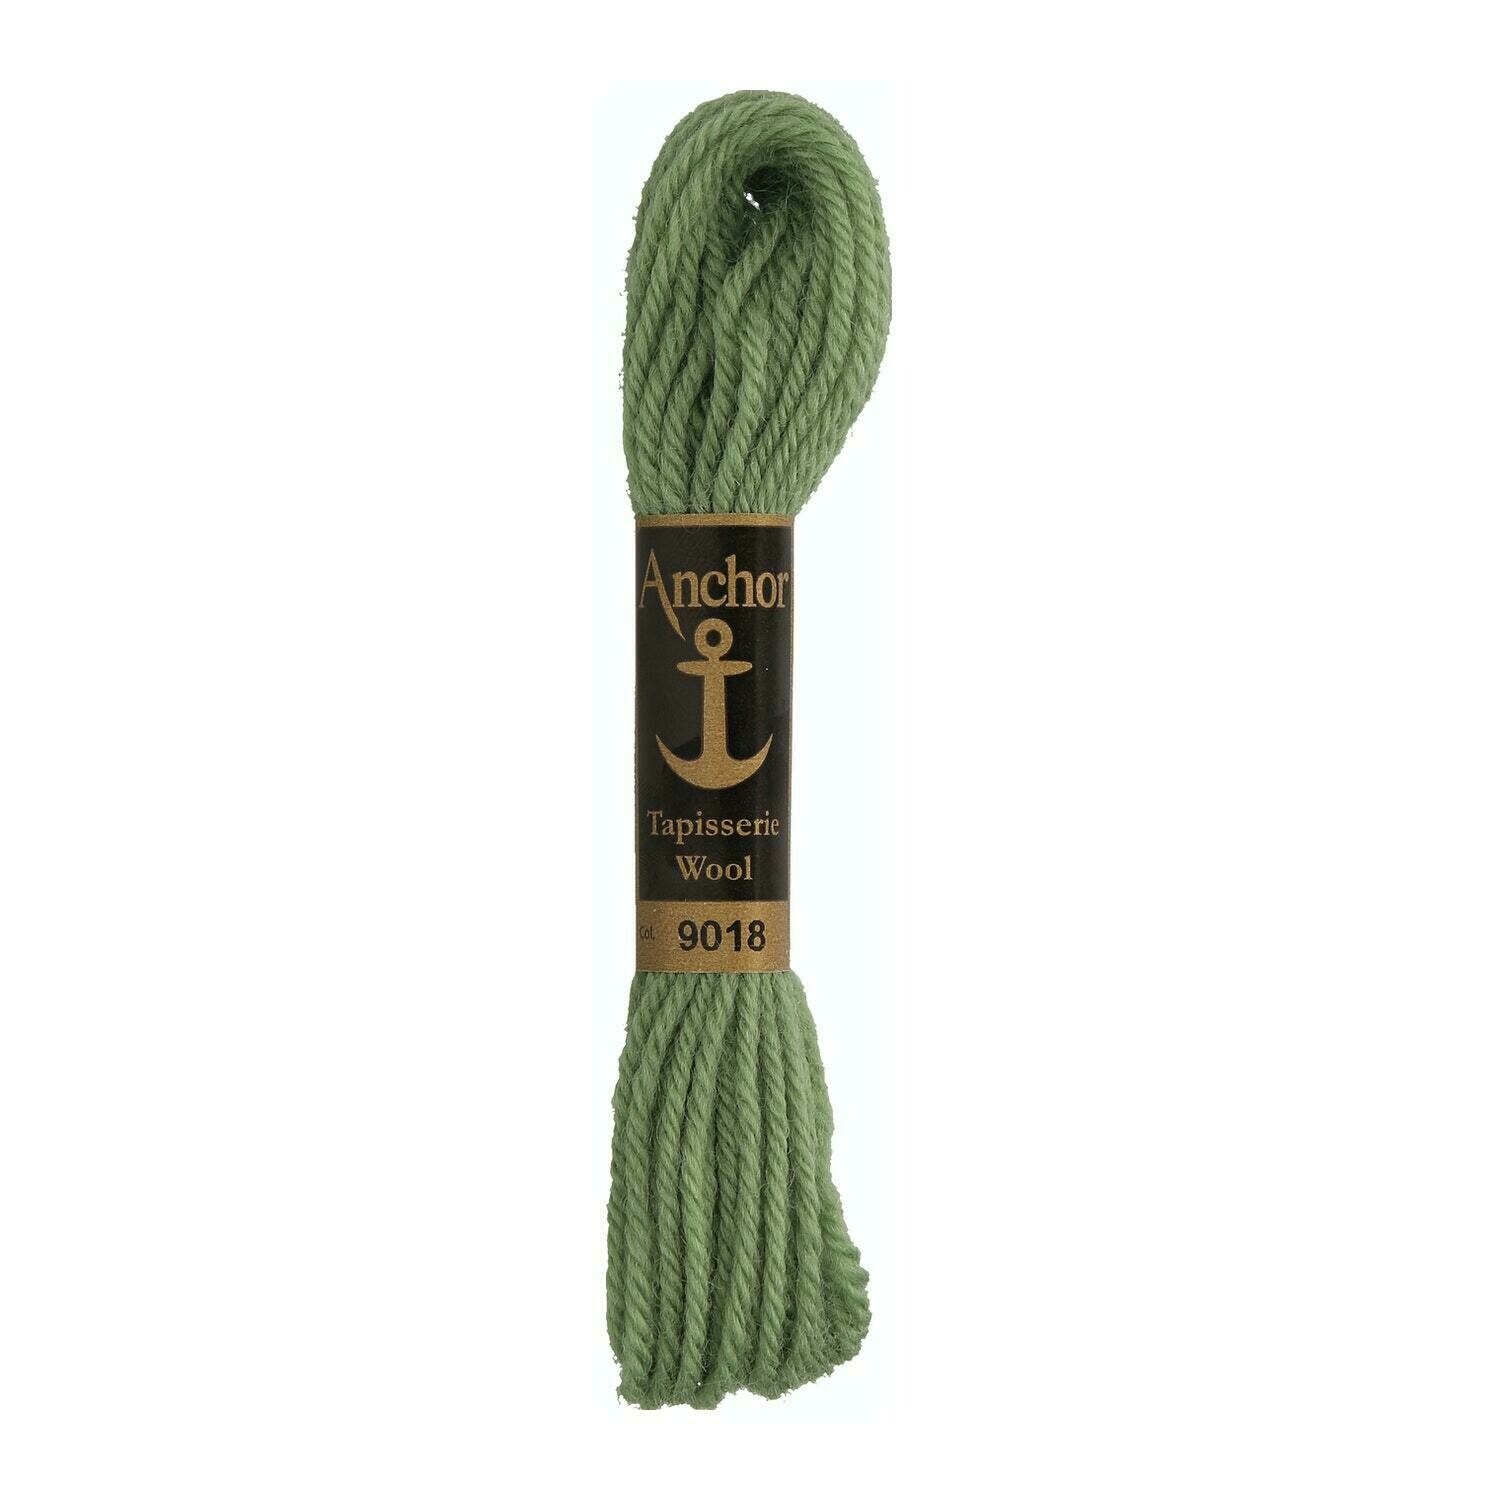 Anchor Tapisserie Wool #09018